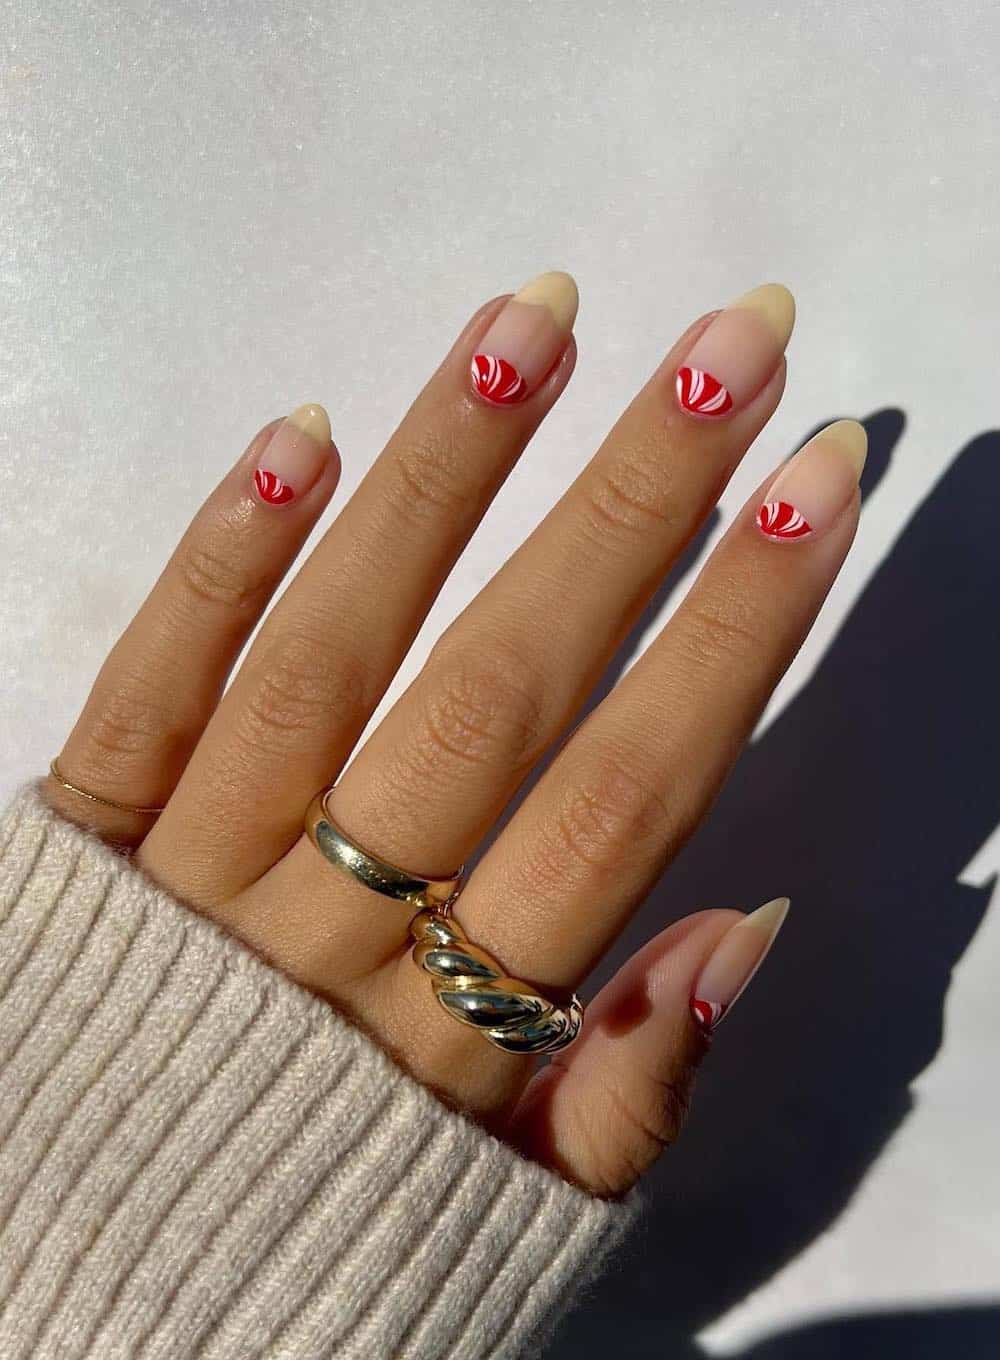 Natural manicure with red and white peppermint detail.